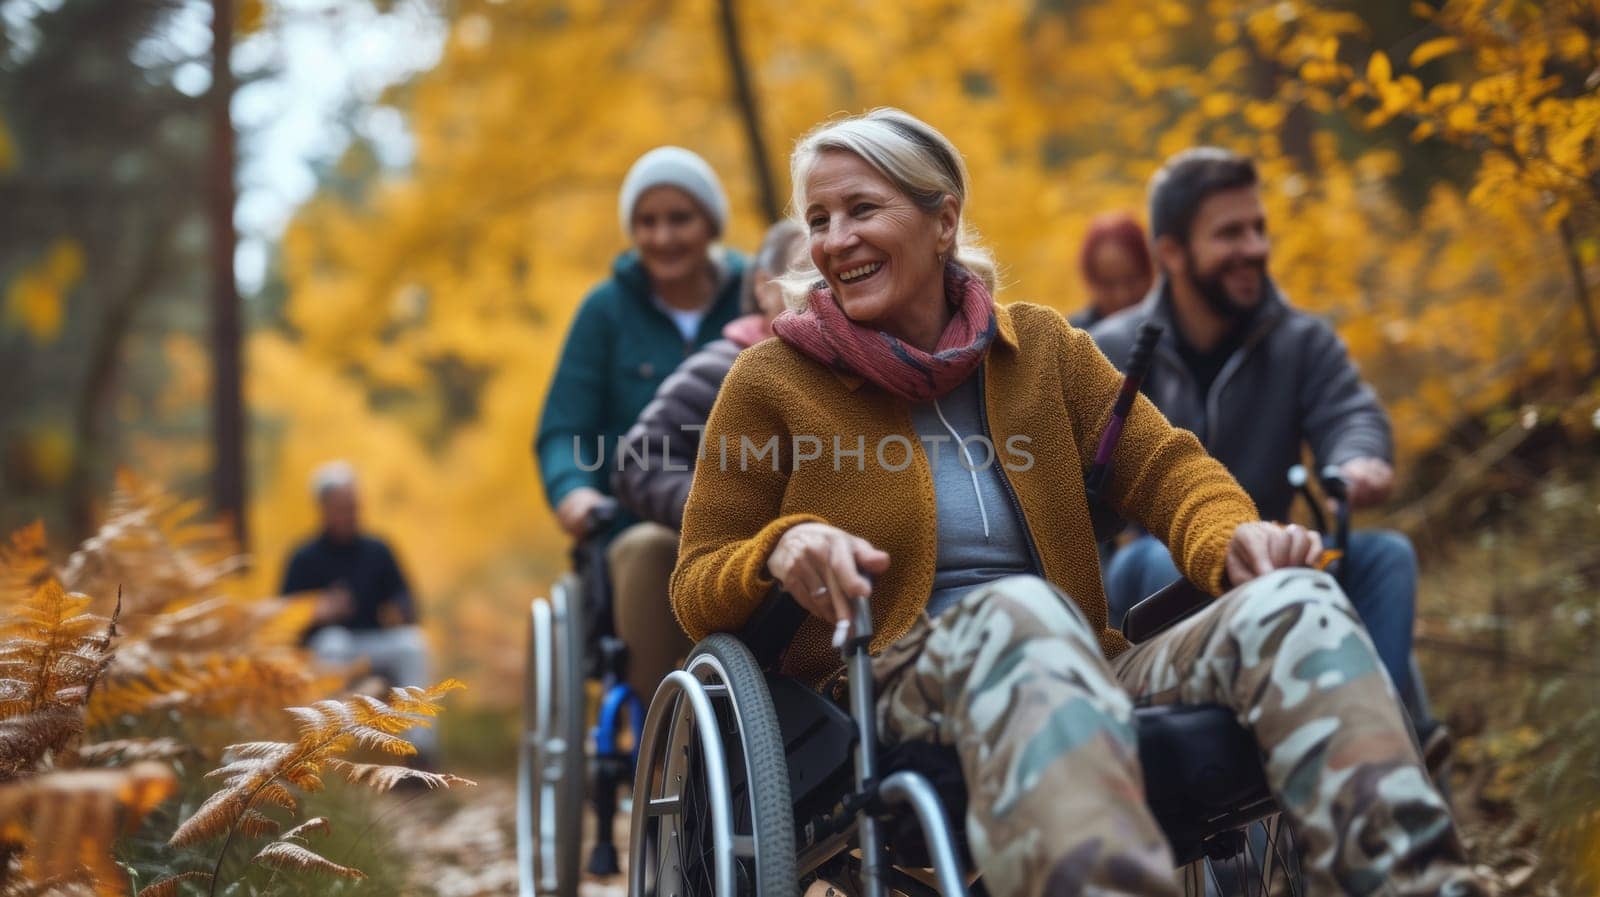 A group of people in wheelchairs on a trail through the woods